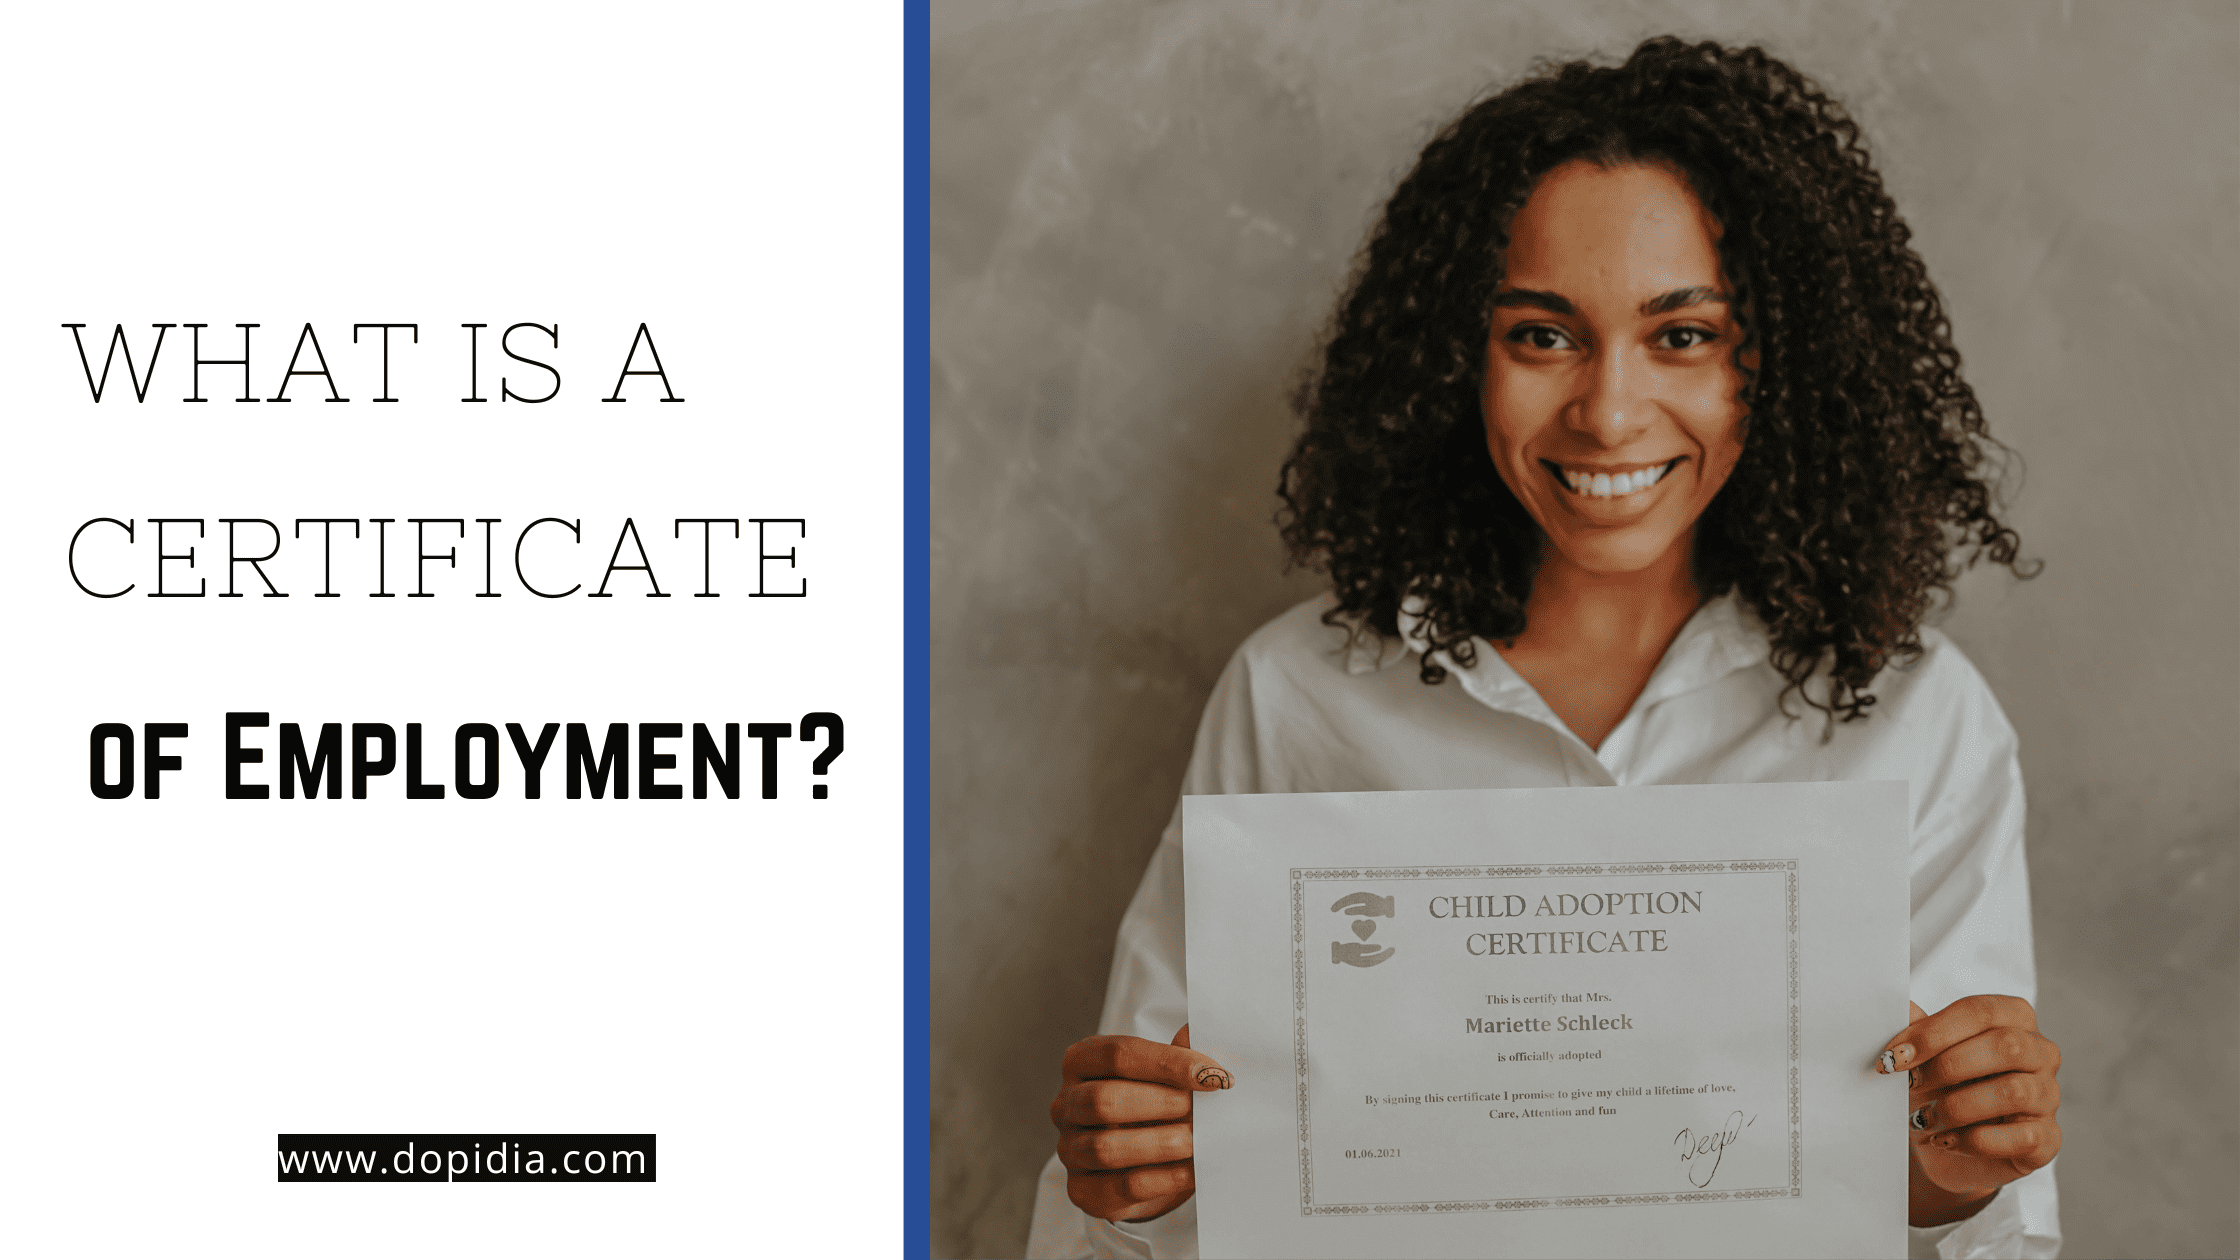 What is a certificate of employment?